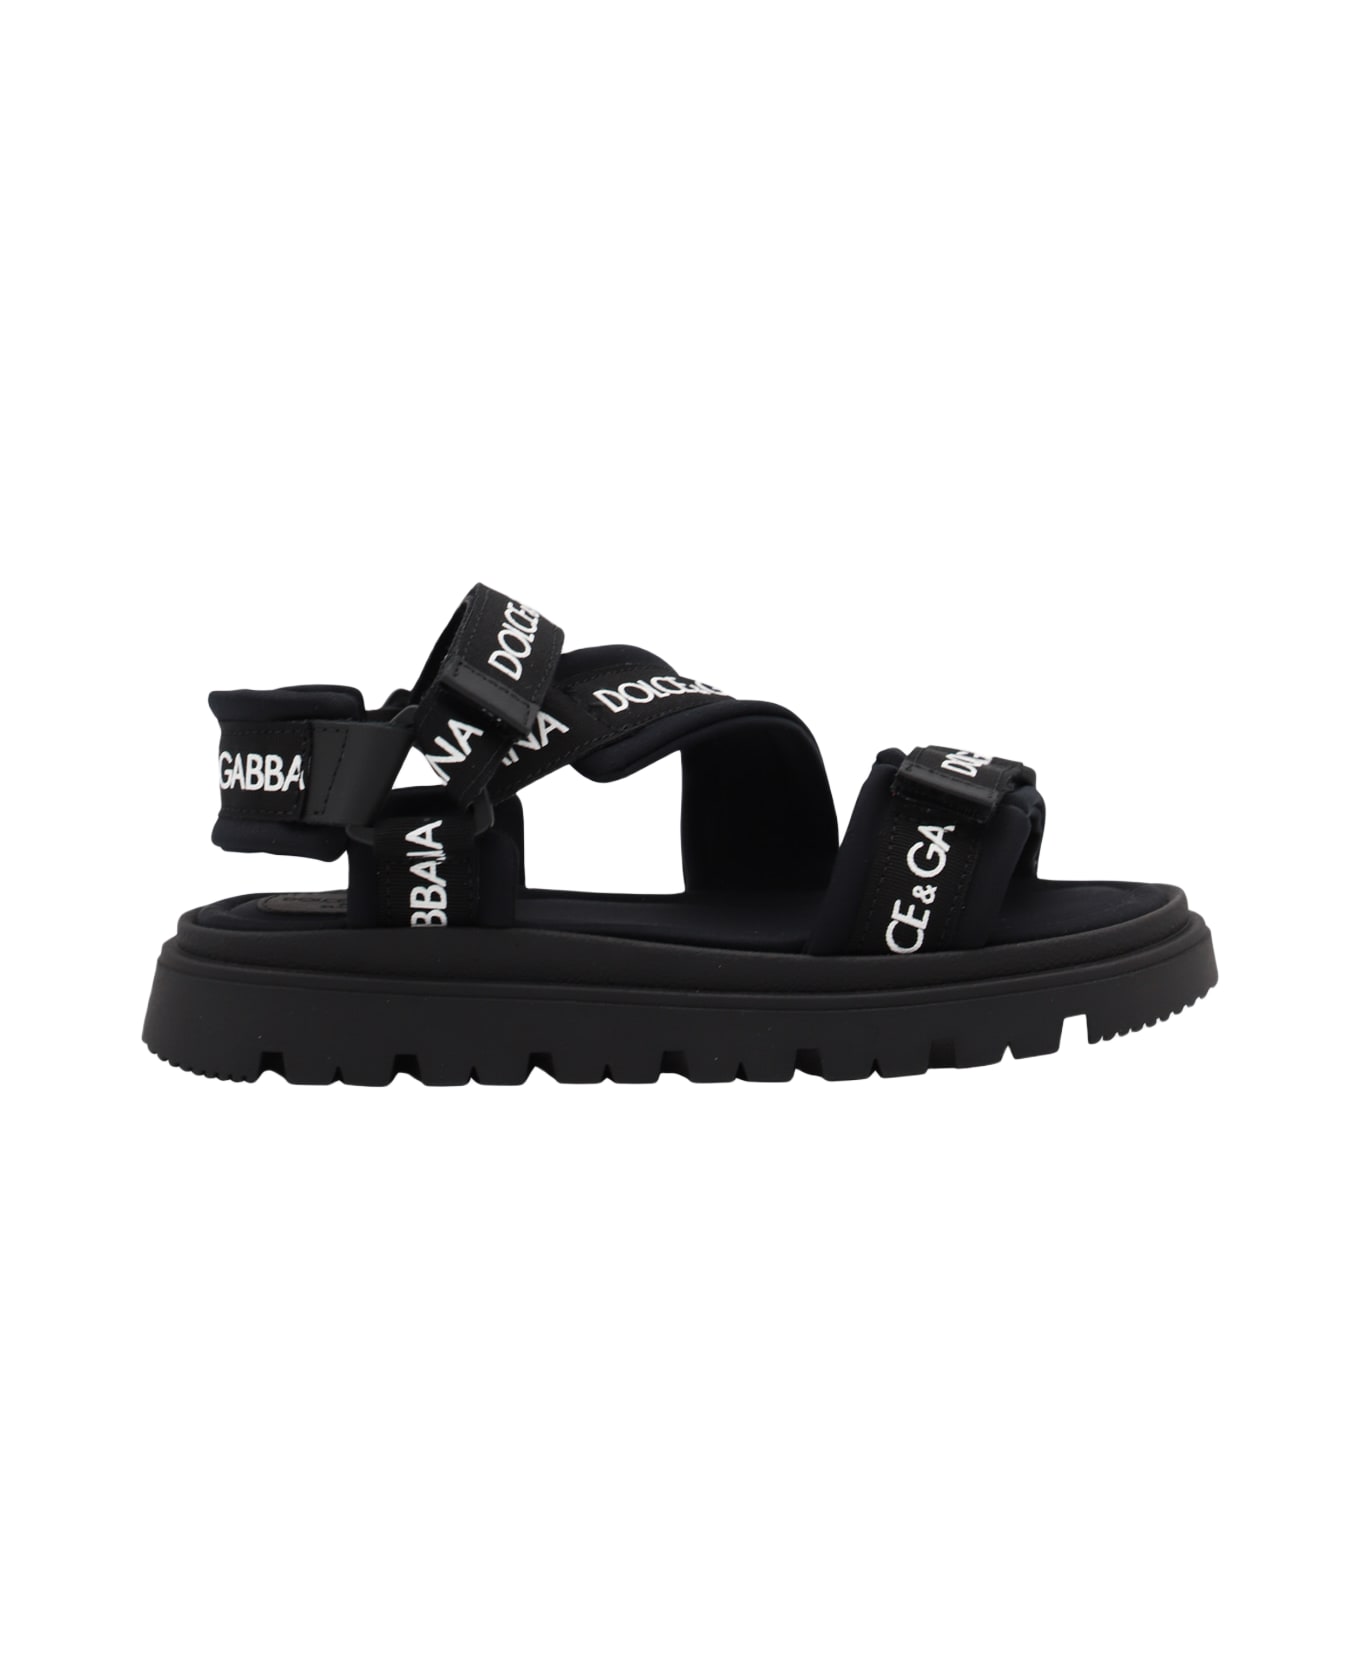 Dolce & Gabbana Black Cotton And Leather Sandals - Black